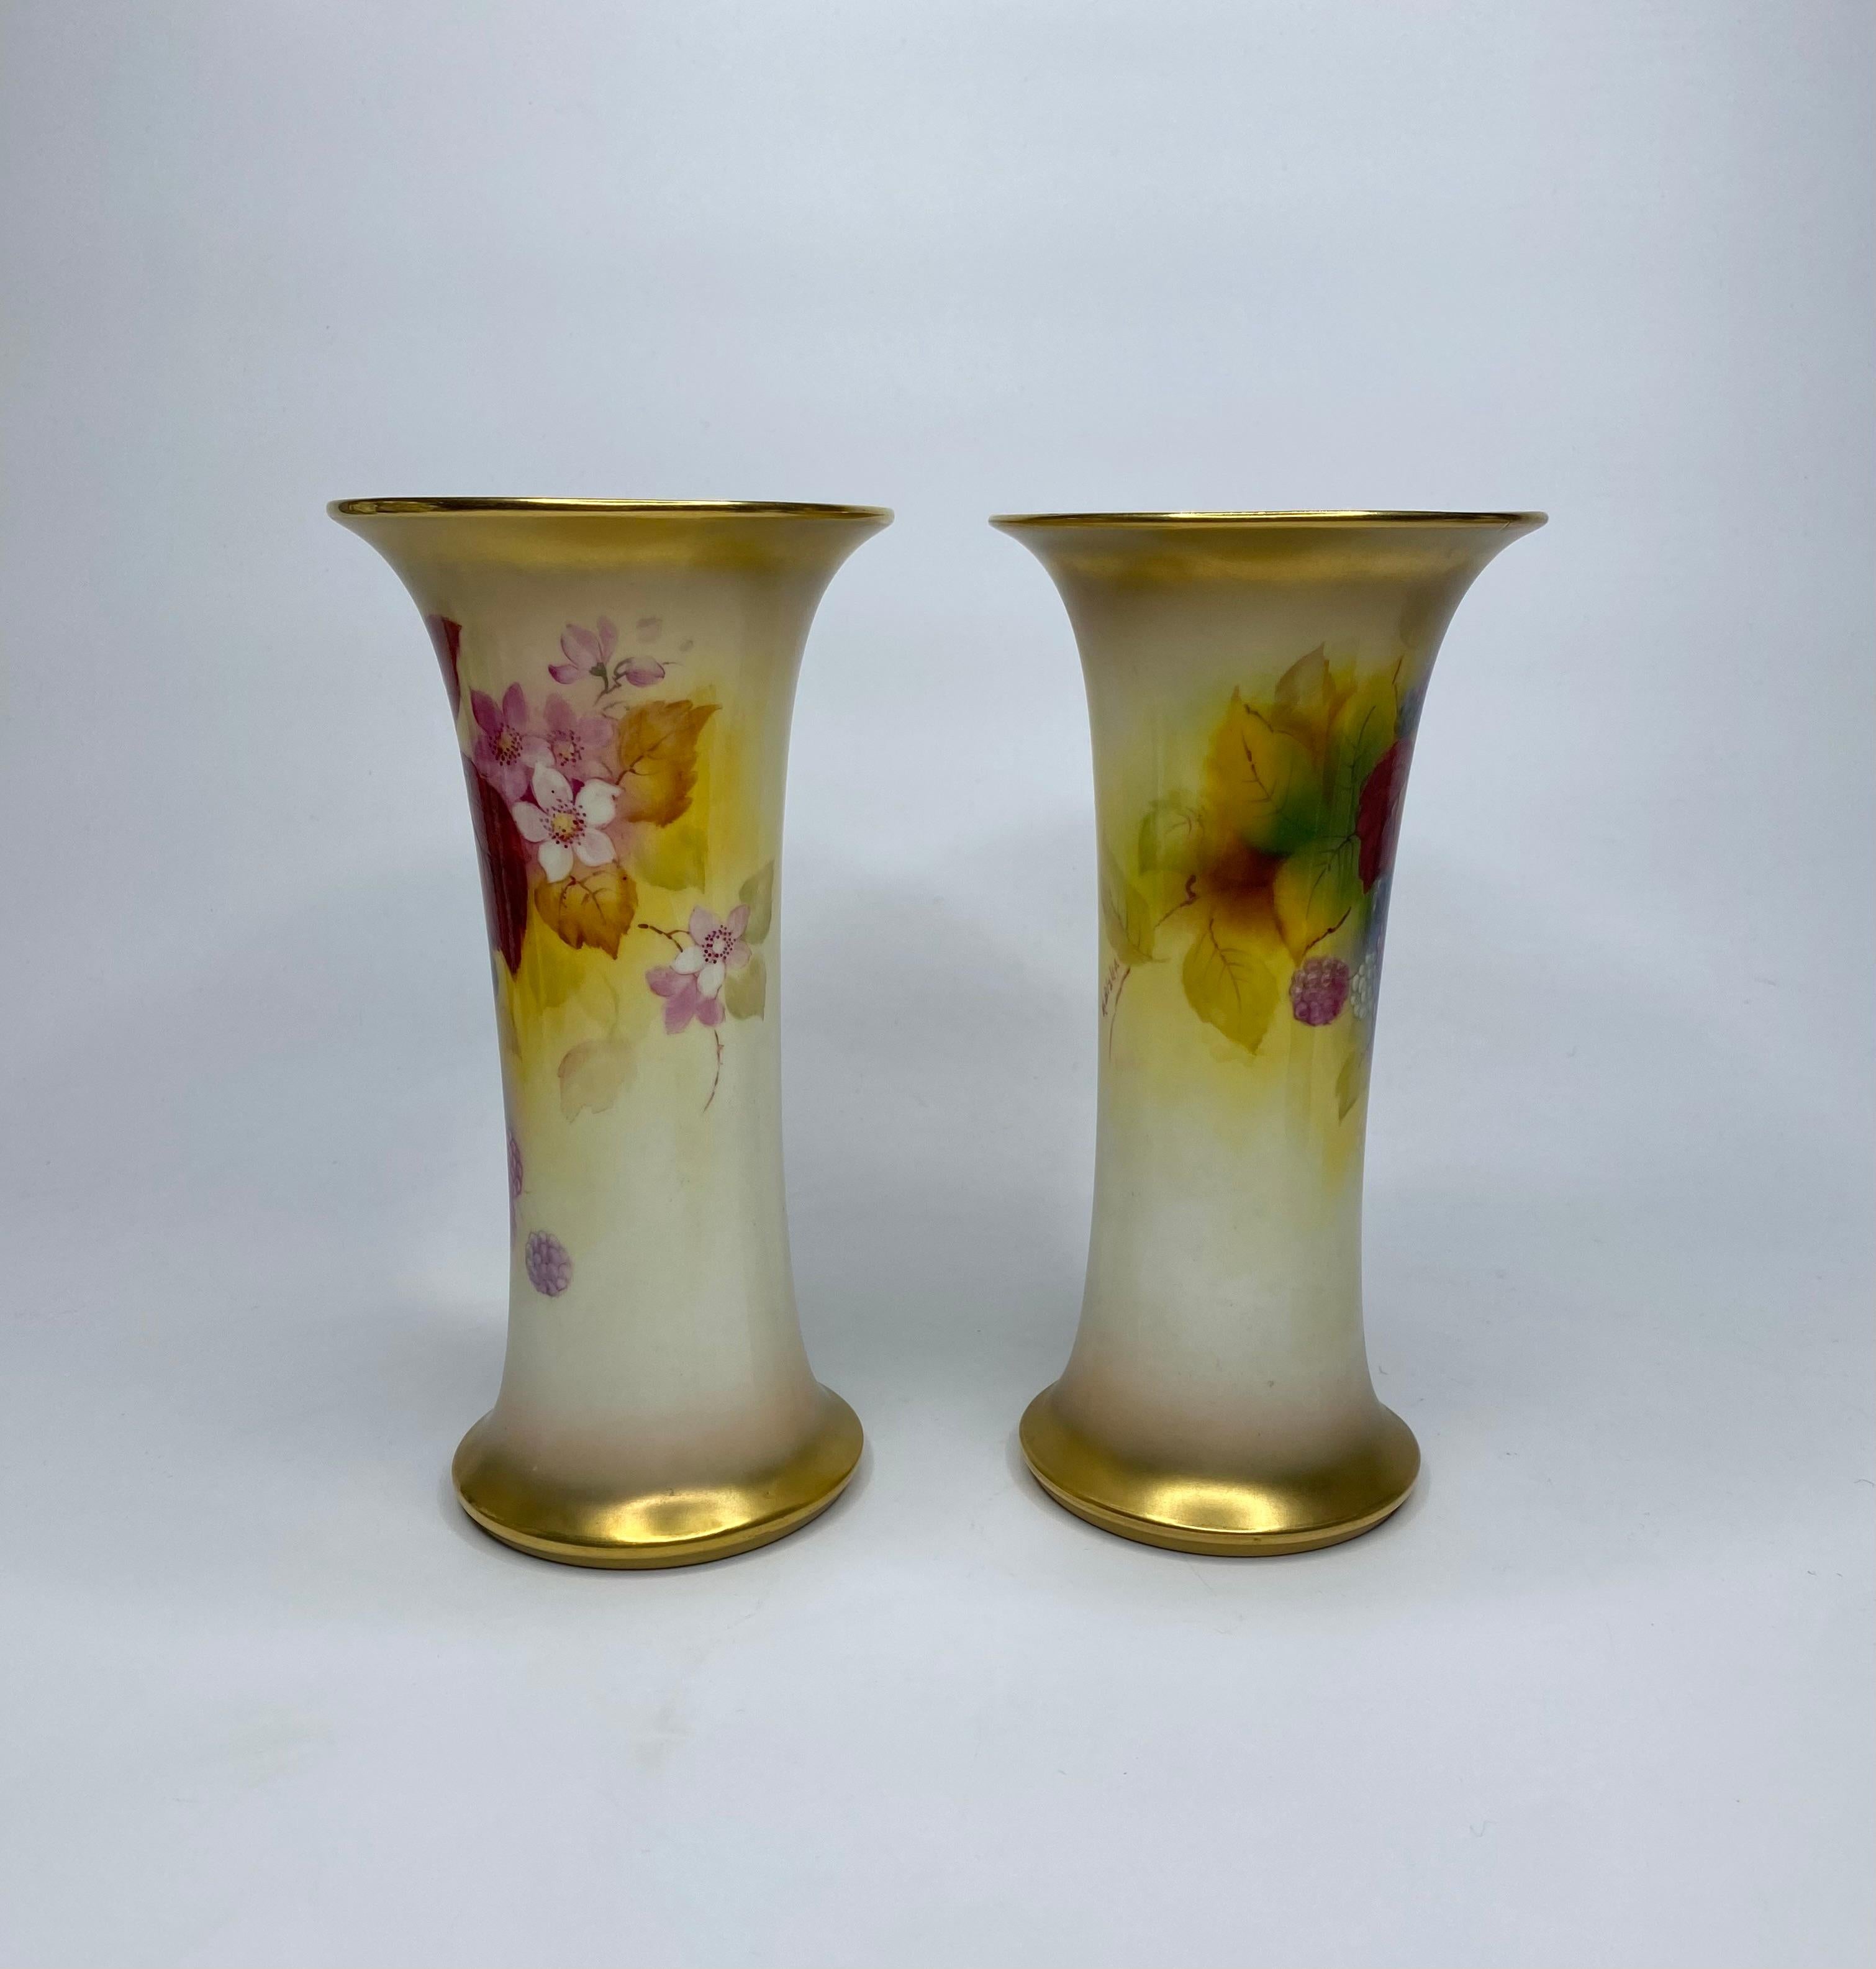 Pair of Royal Worcester porcelain vases, signed Kitty Blake, dated 1936. Both trumpet shaped vases, finely painted with studies of blackberries, amongst autumnal leaves, and blossom, between gilded rims.
Signed – K. Blake.
Printed puce factory